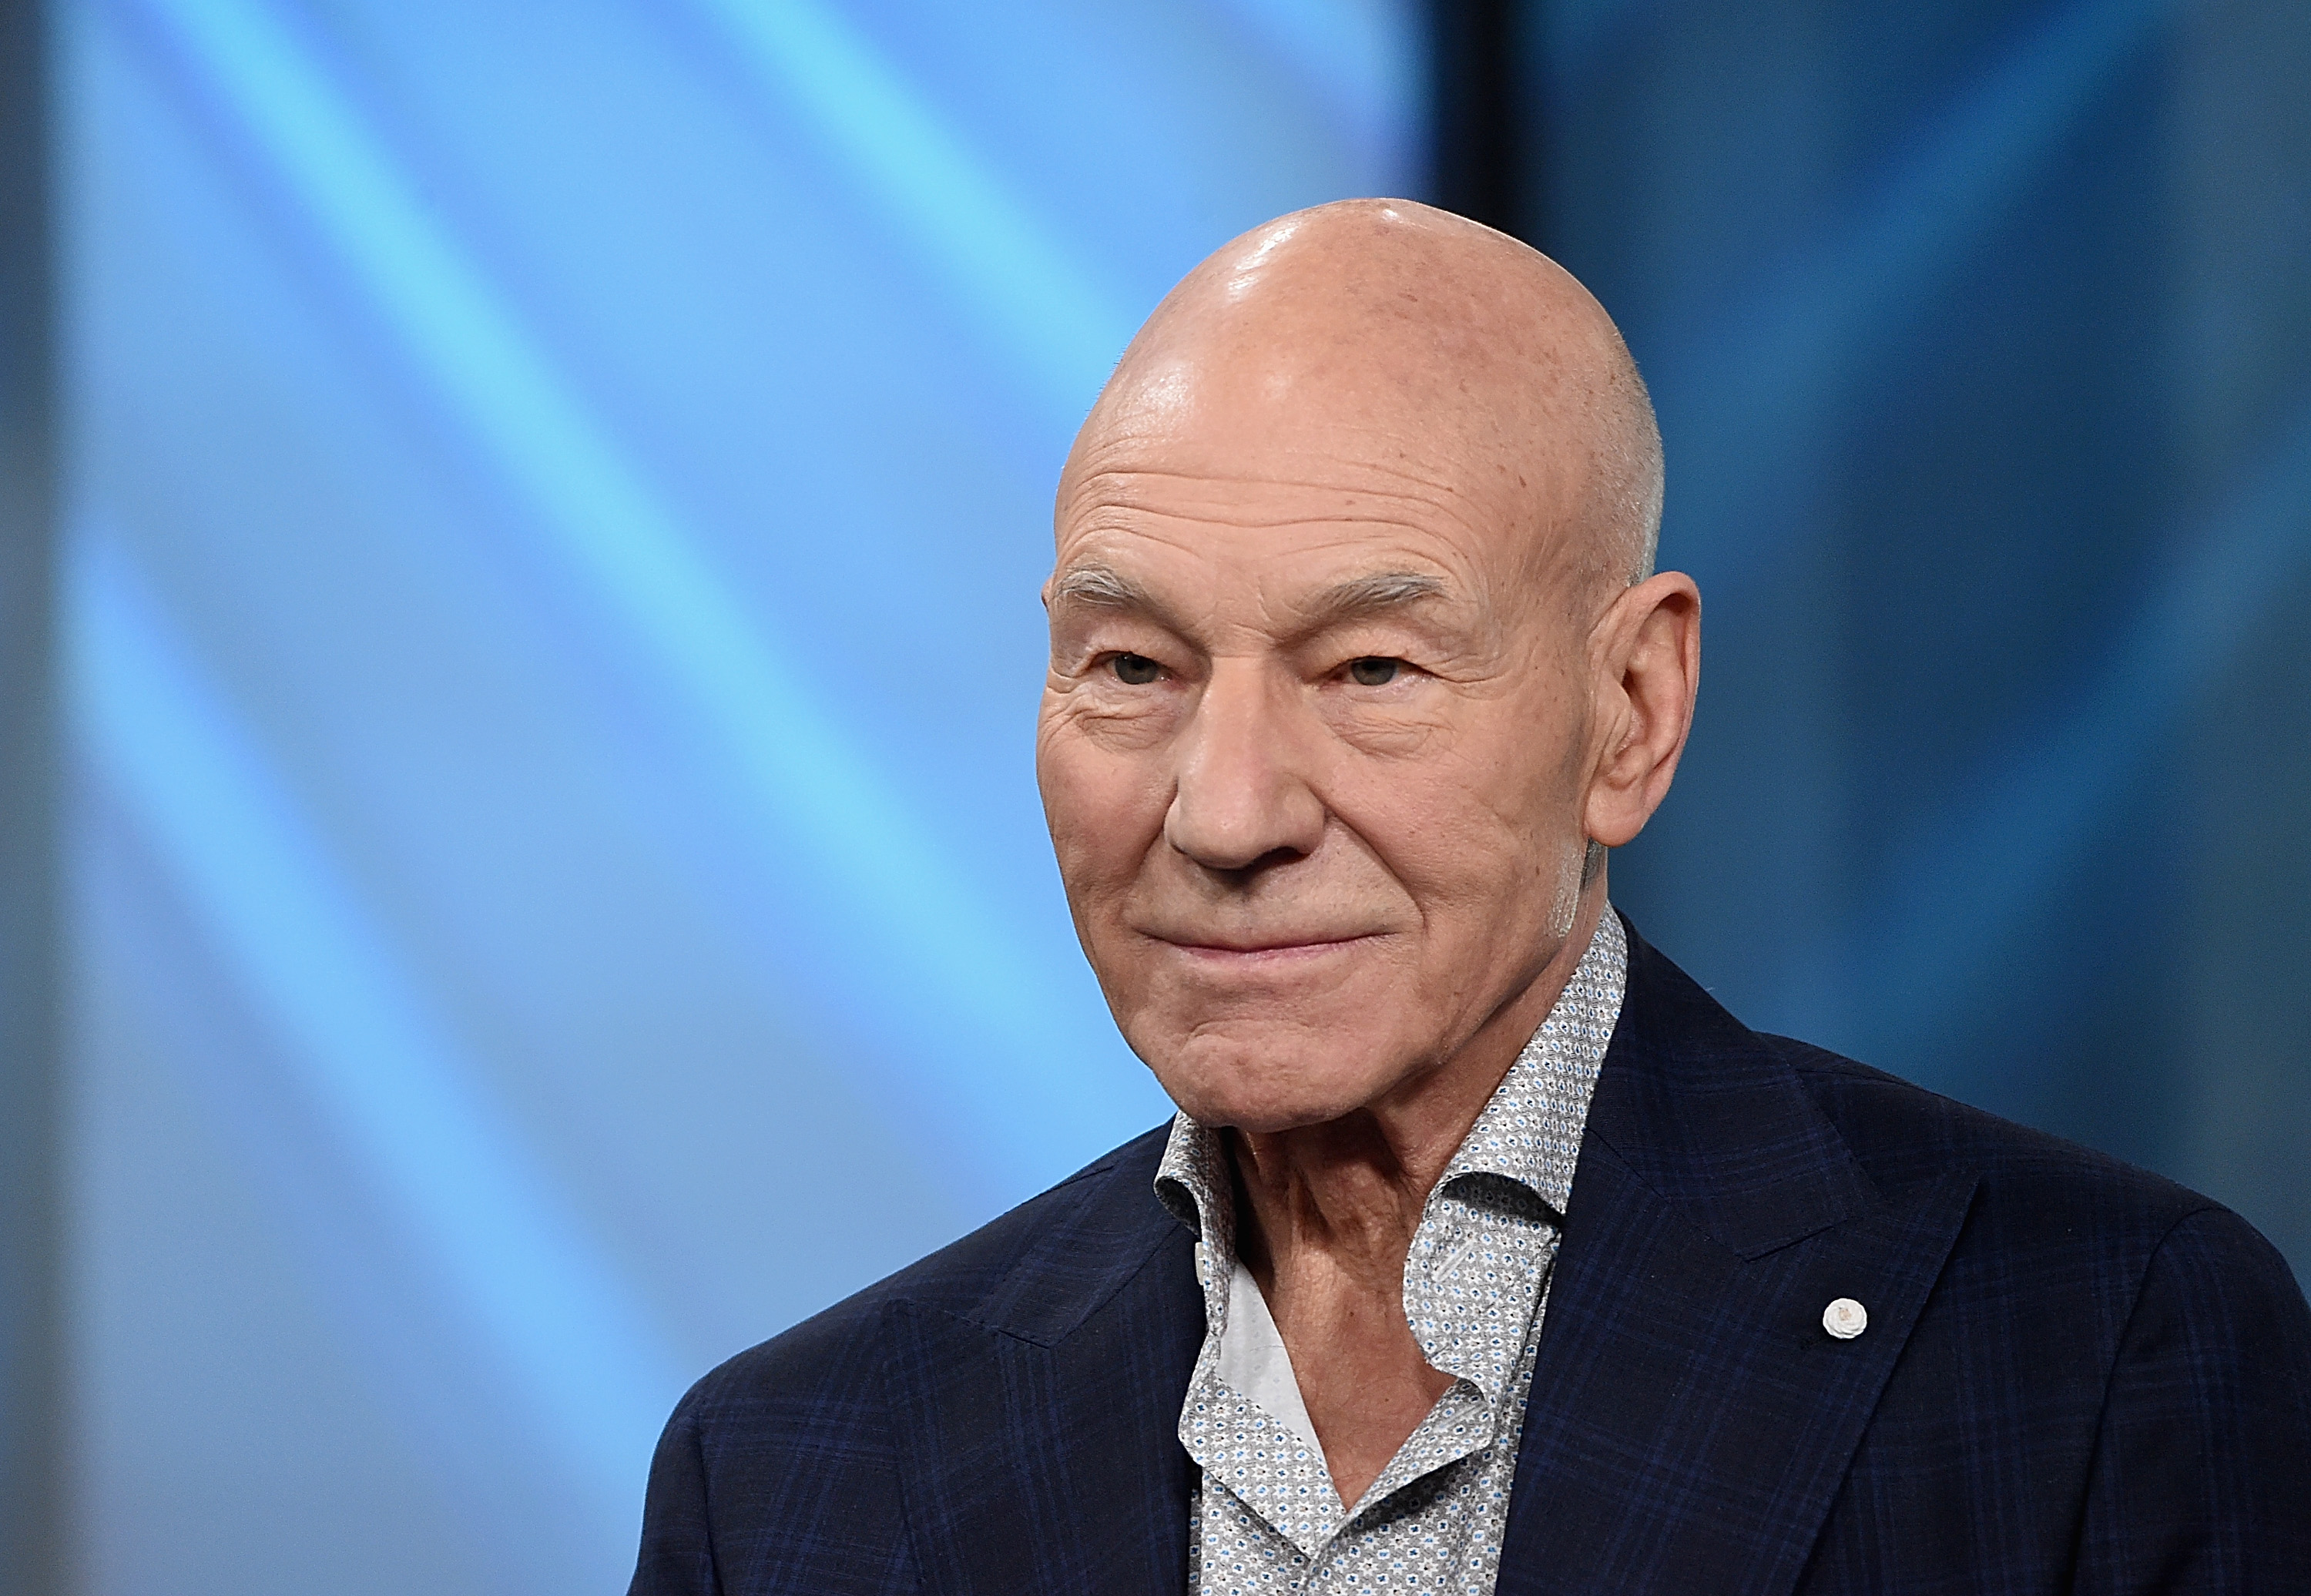 Patrick Stewart attends the Build Series Presents Hugh Jackman And Patrick Stewart Discussing "Logan" at Build Studio on March 2, 2017 in New York City. (Jamie McCarthy—Getty Images)